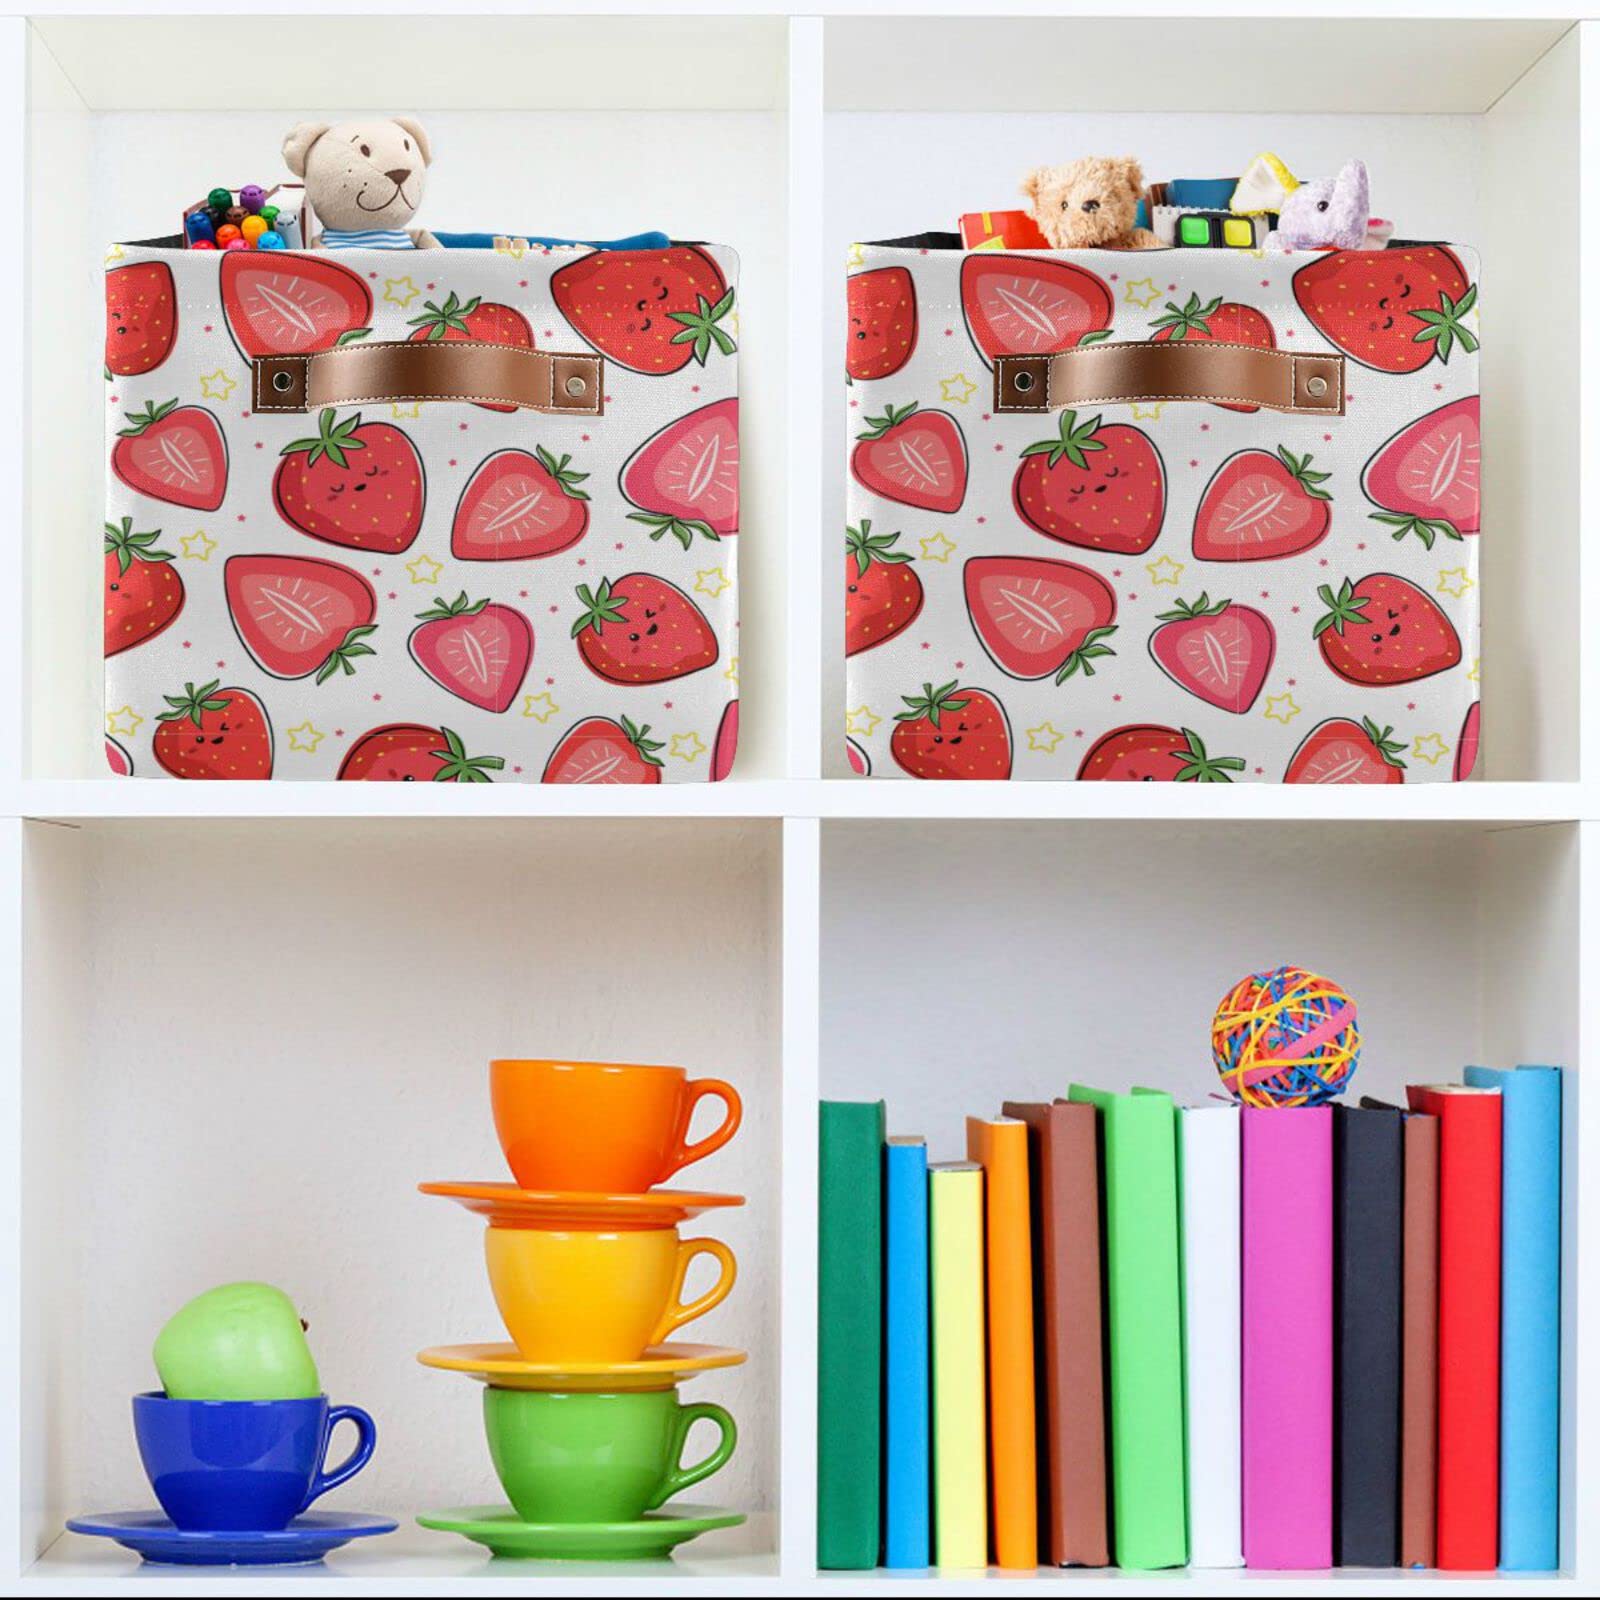 ALAZA Strawberry Star Polka Dots Large Storage Basket with Handles Foldable Decorative 1 Pack Storage Bin Box for Organizing Living Room Shelves Office Closet Clothes